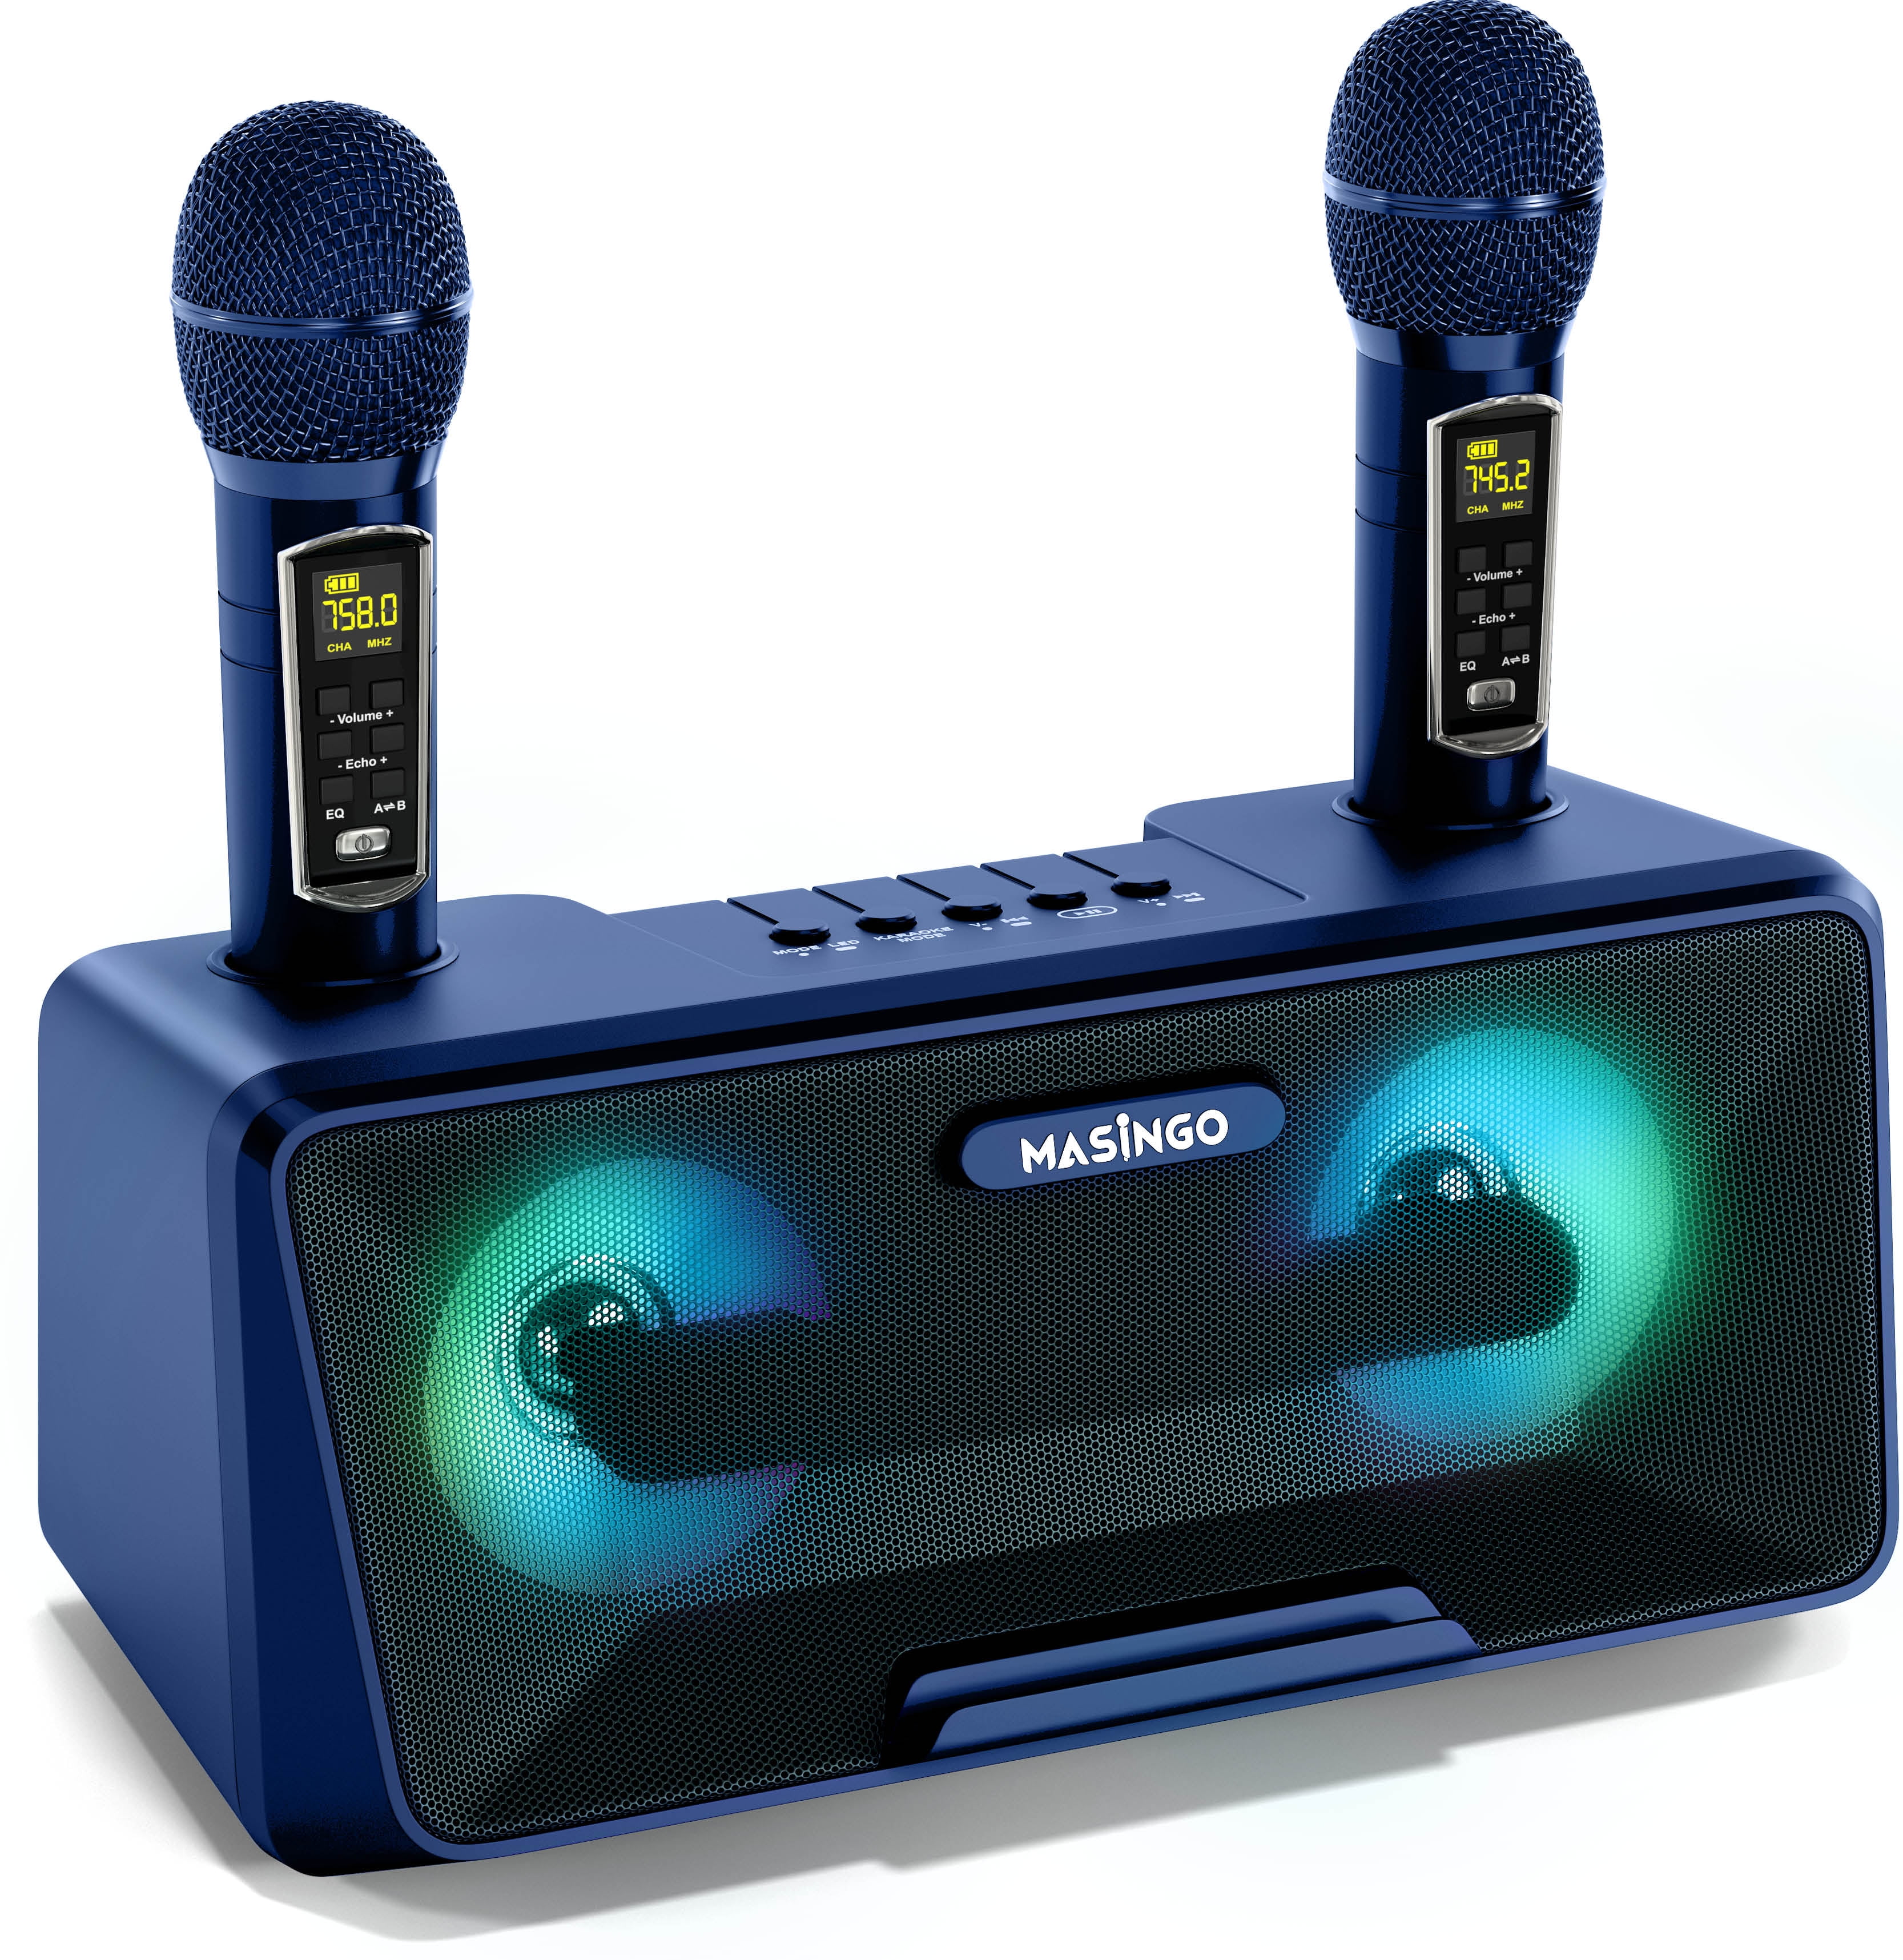 Portable Karaoke Machine for Kids & Adults Unique Design Singing Machine with Bluetooth Speaker PA System Phone Holder LED Lights Microphones Perfect for Home Party Holidays Celebration 